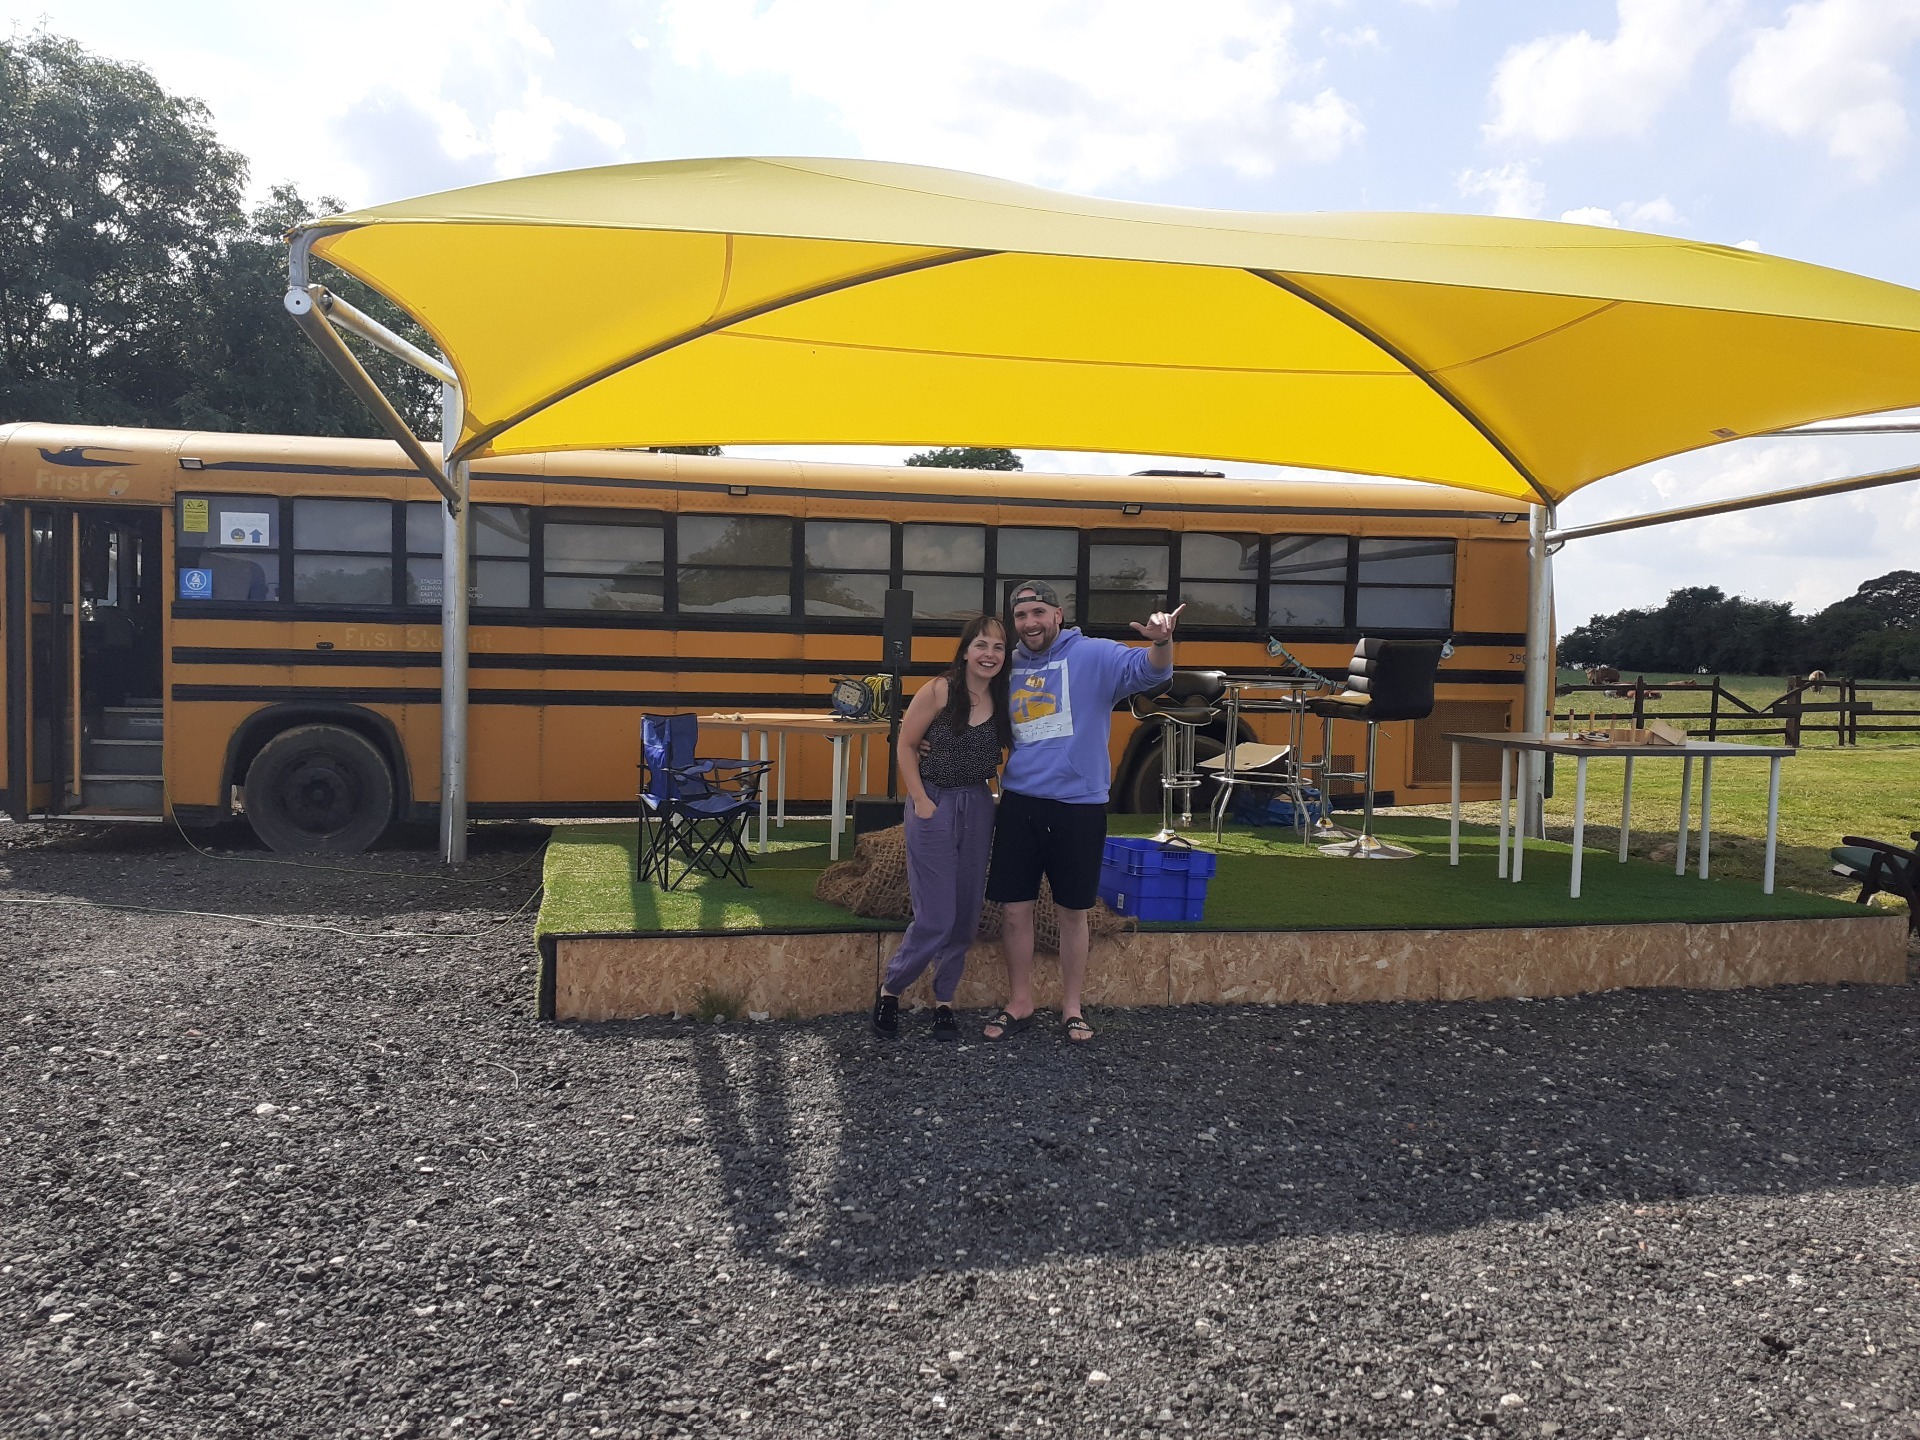 Chrissy and Mike stood in front of The Old Farm Bus - a yellow American-style school bus